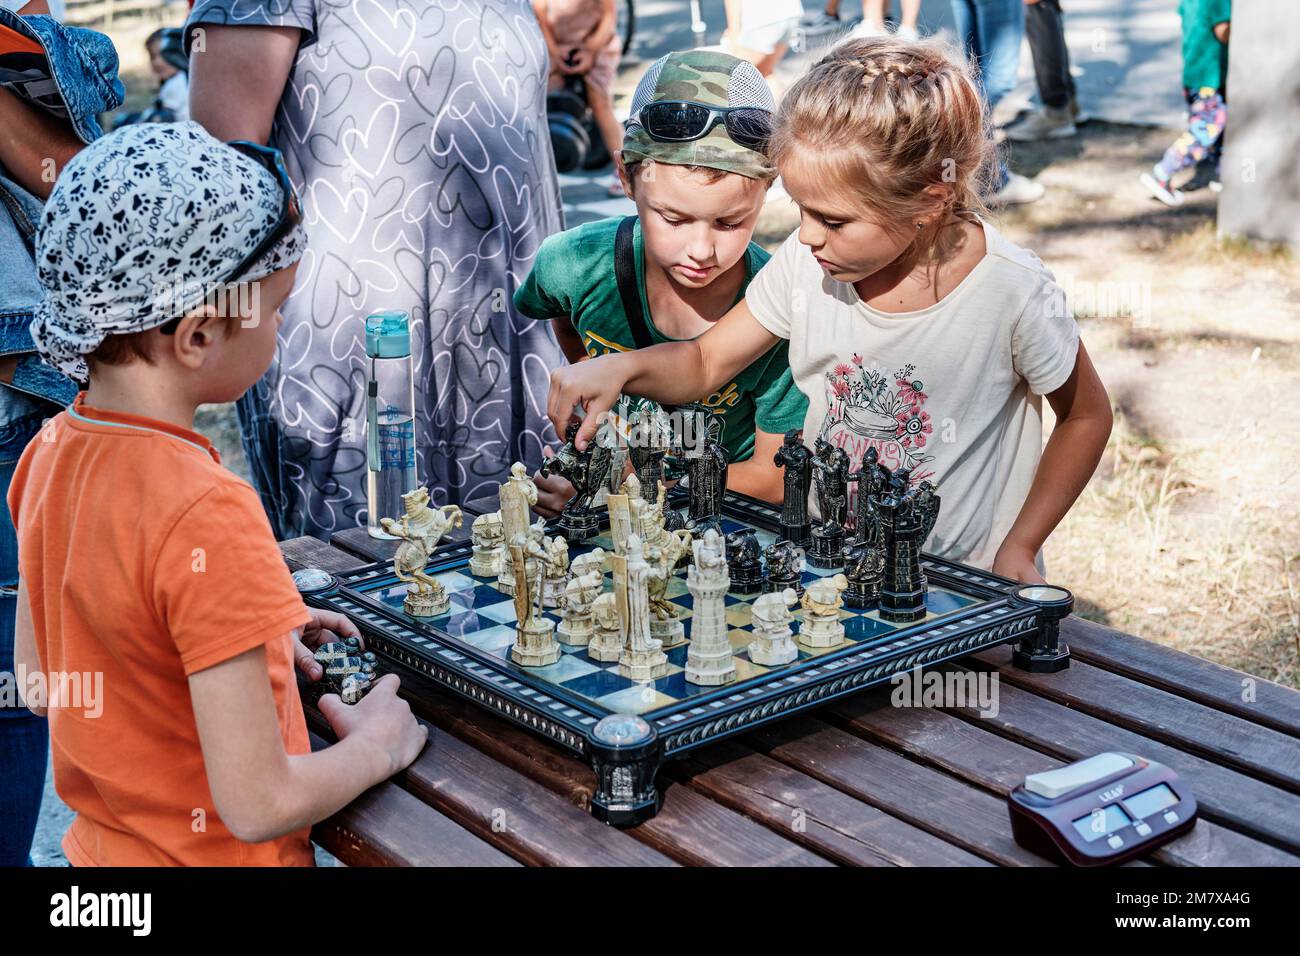 Yekaterinburg, Russia - August 28, 2022: Children playing chess with figures in form of characters from Harry Potter movie. Small girl making chess mo Stock Photo